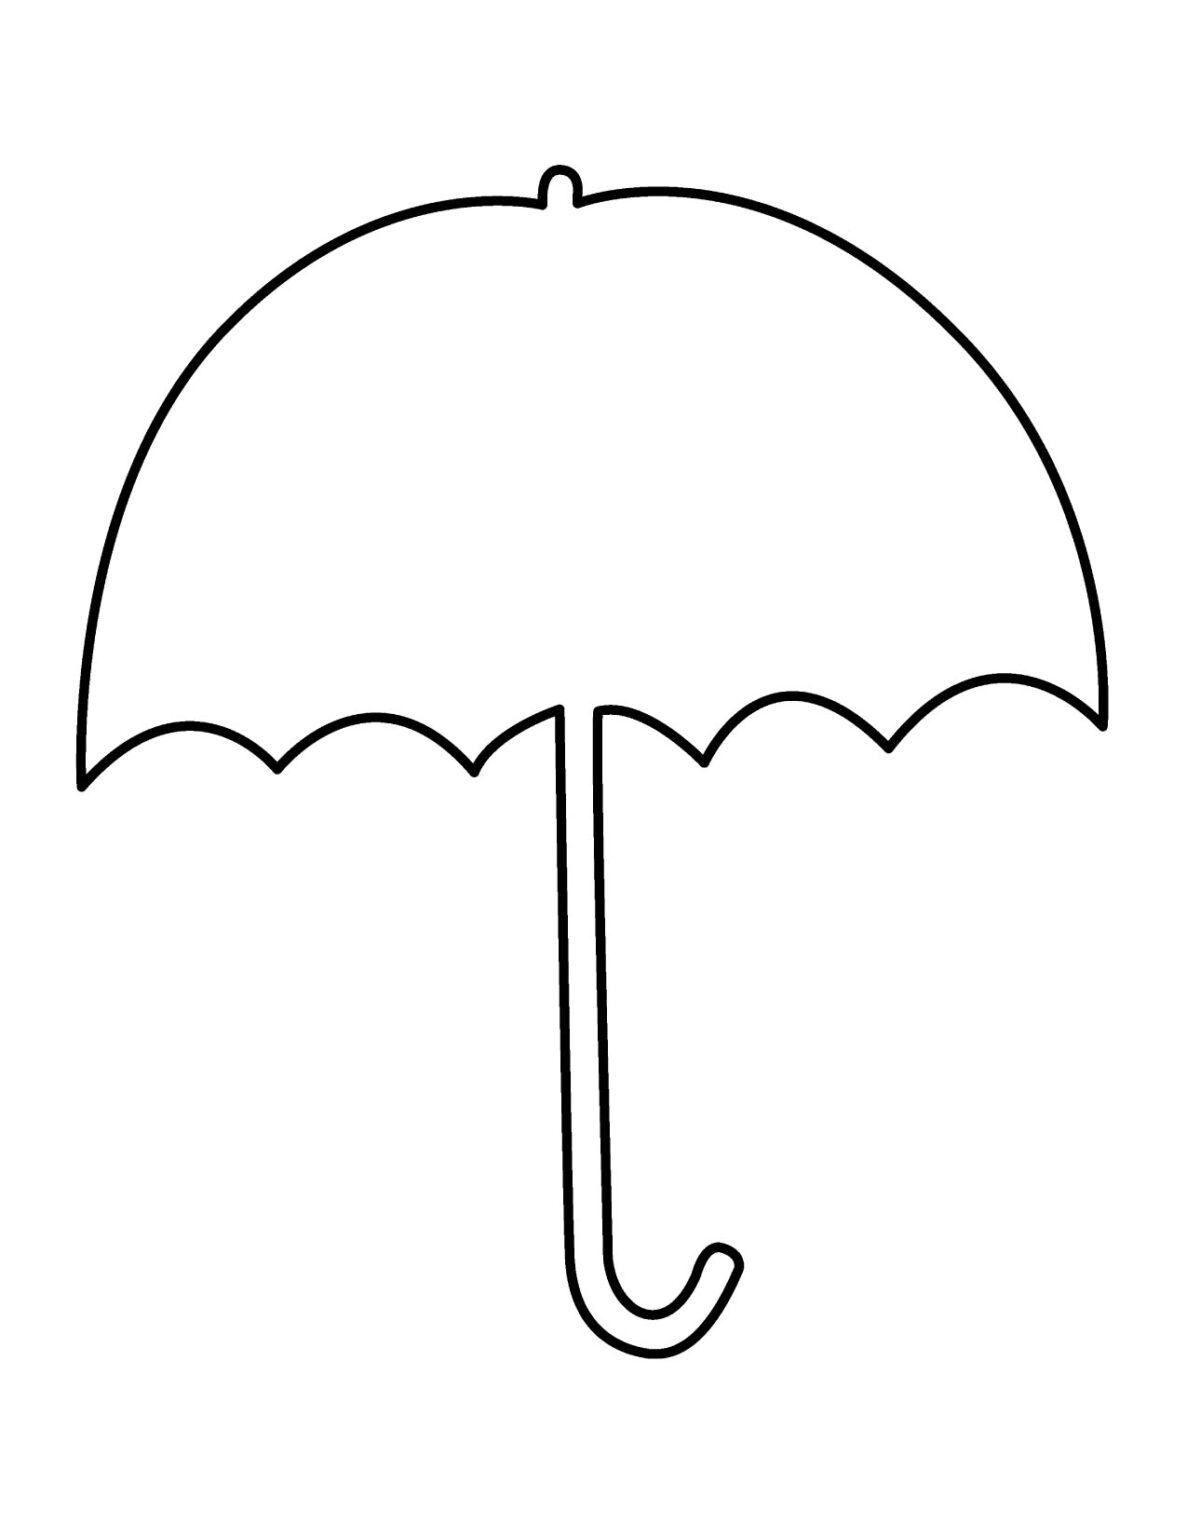 Closed Umbrella Outline Images Pictures Becuo Clip Art Inside Blank